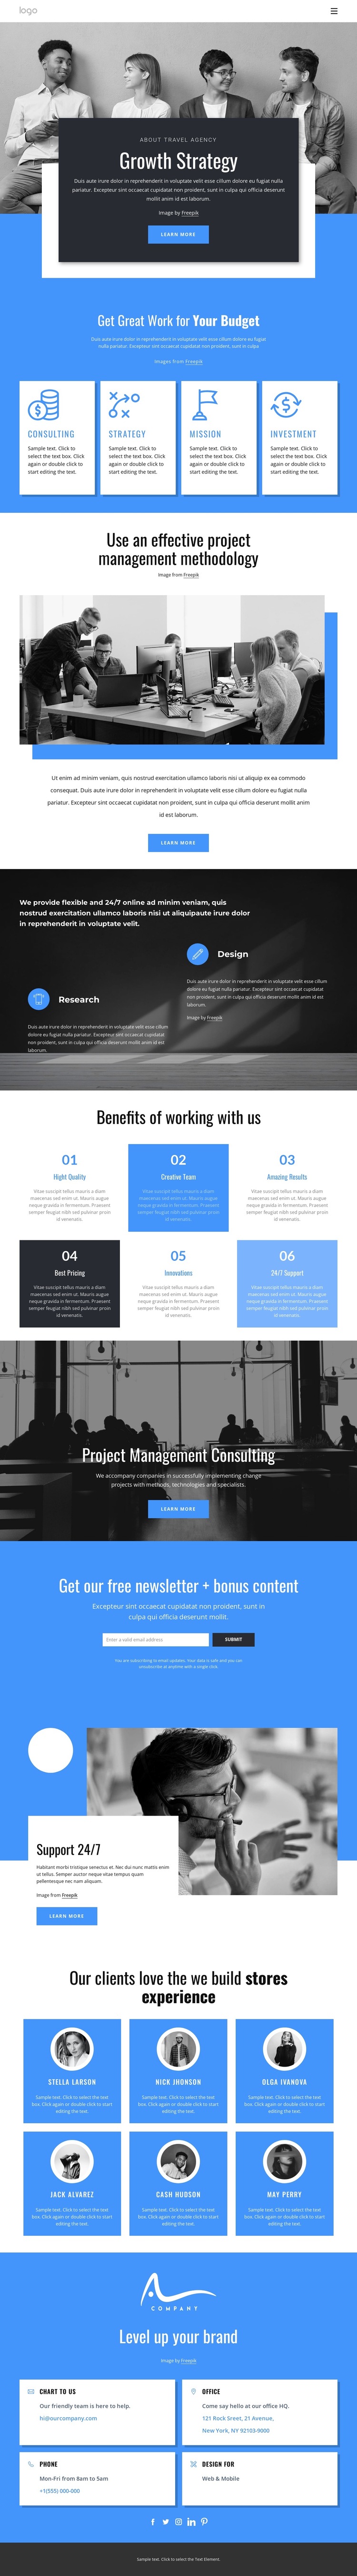 Growth strategy consulting company HTML5 Template